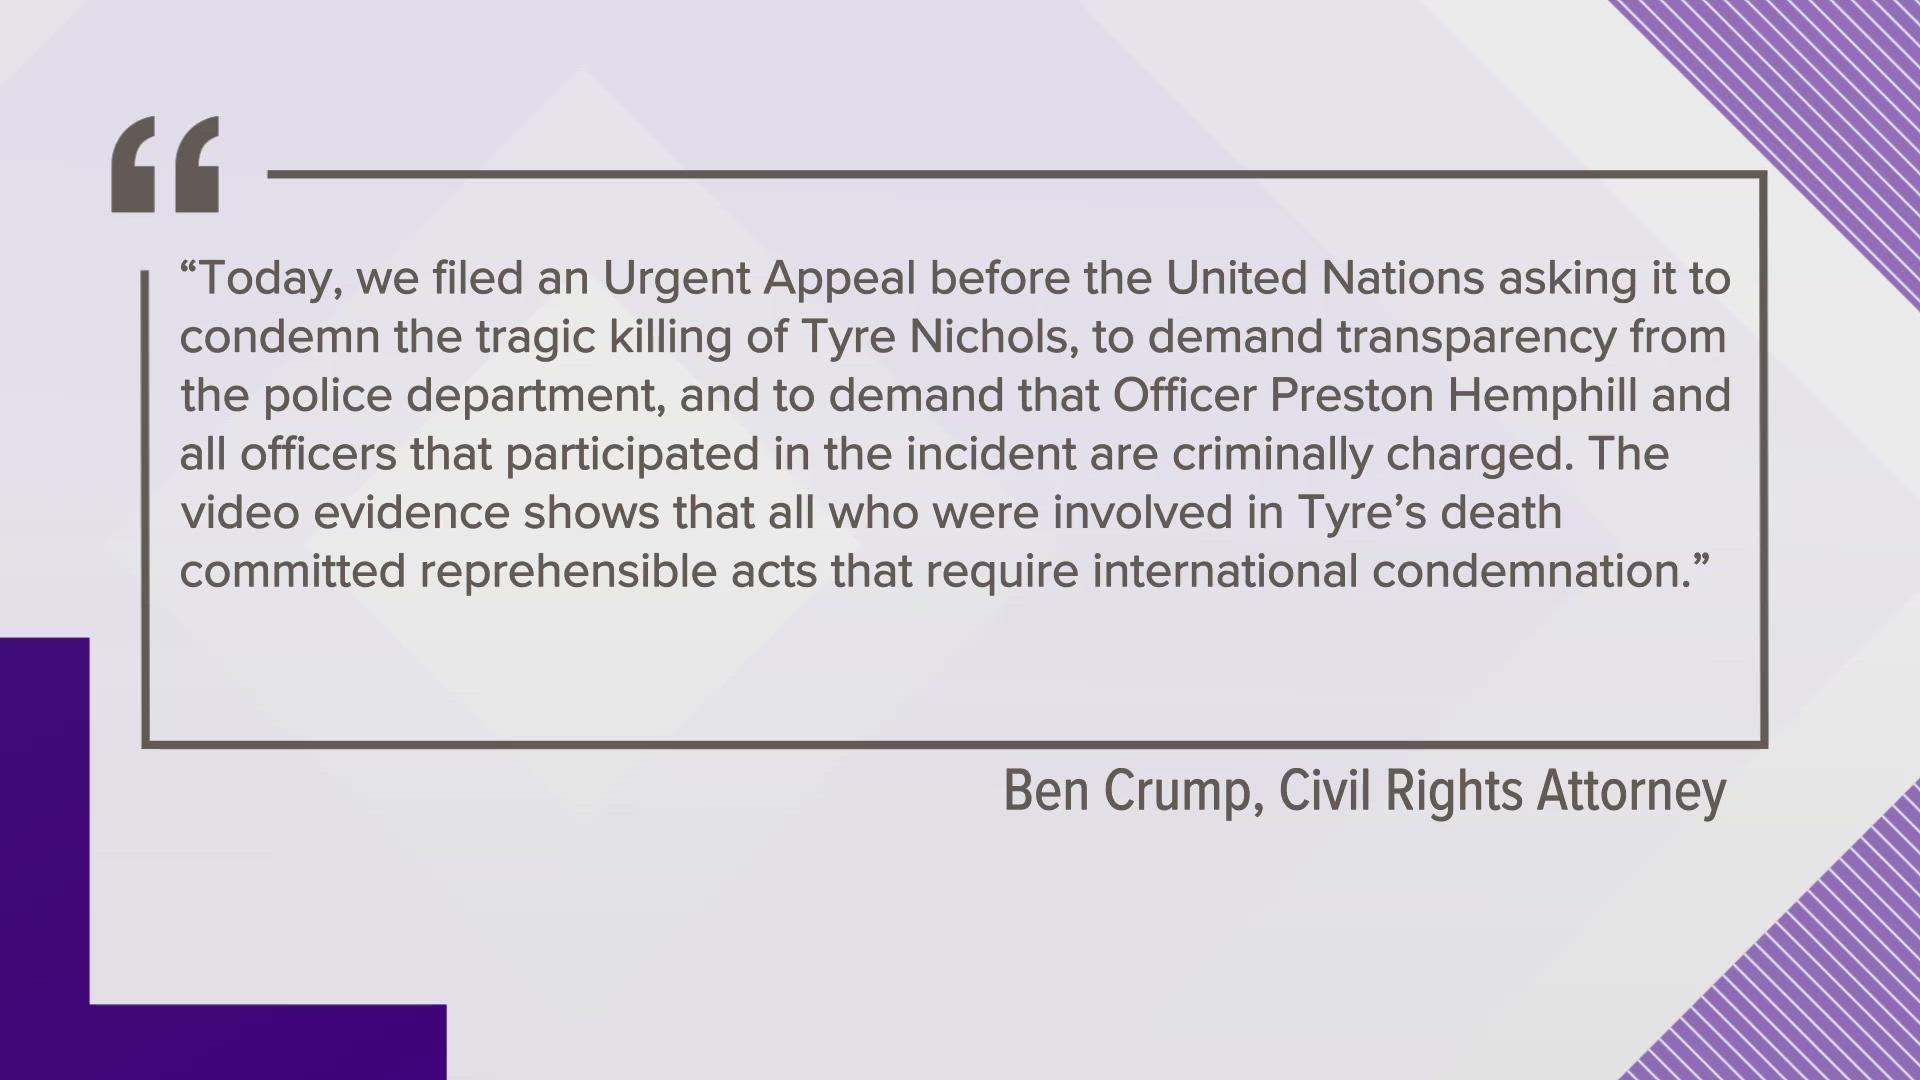 According to a news release from Civil Rights Attorney Ben Crump, the appeal requests “urgent action regarding the torture and extrajudicial killing of Tyre Nichols.